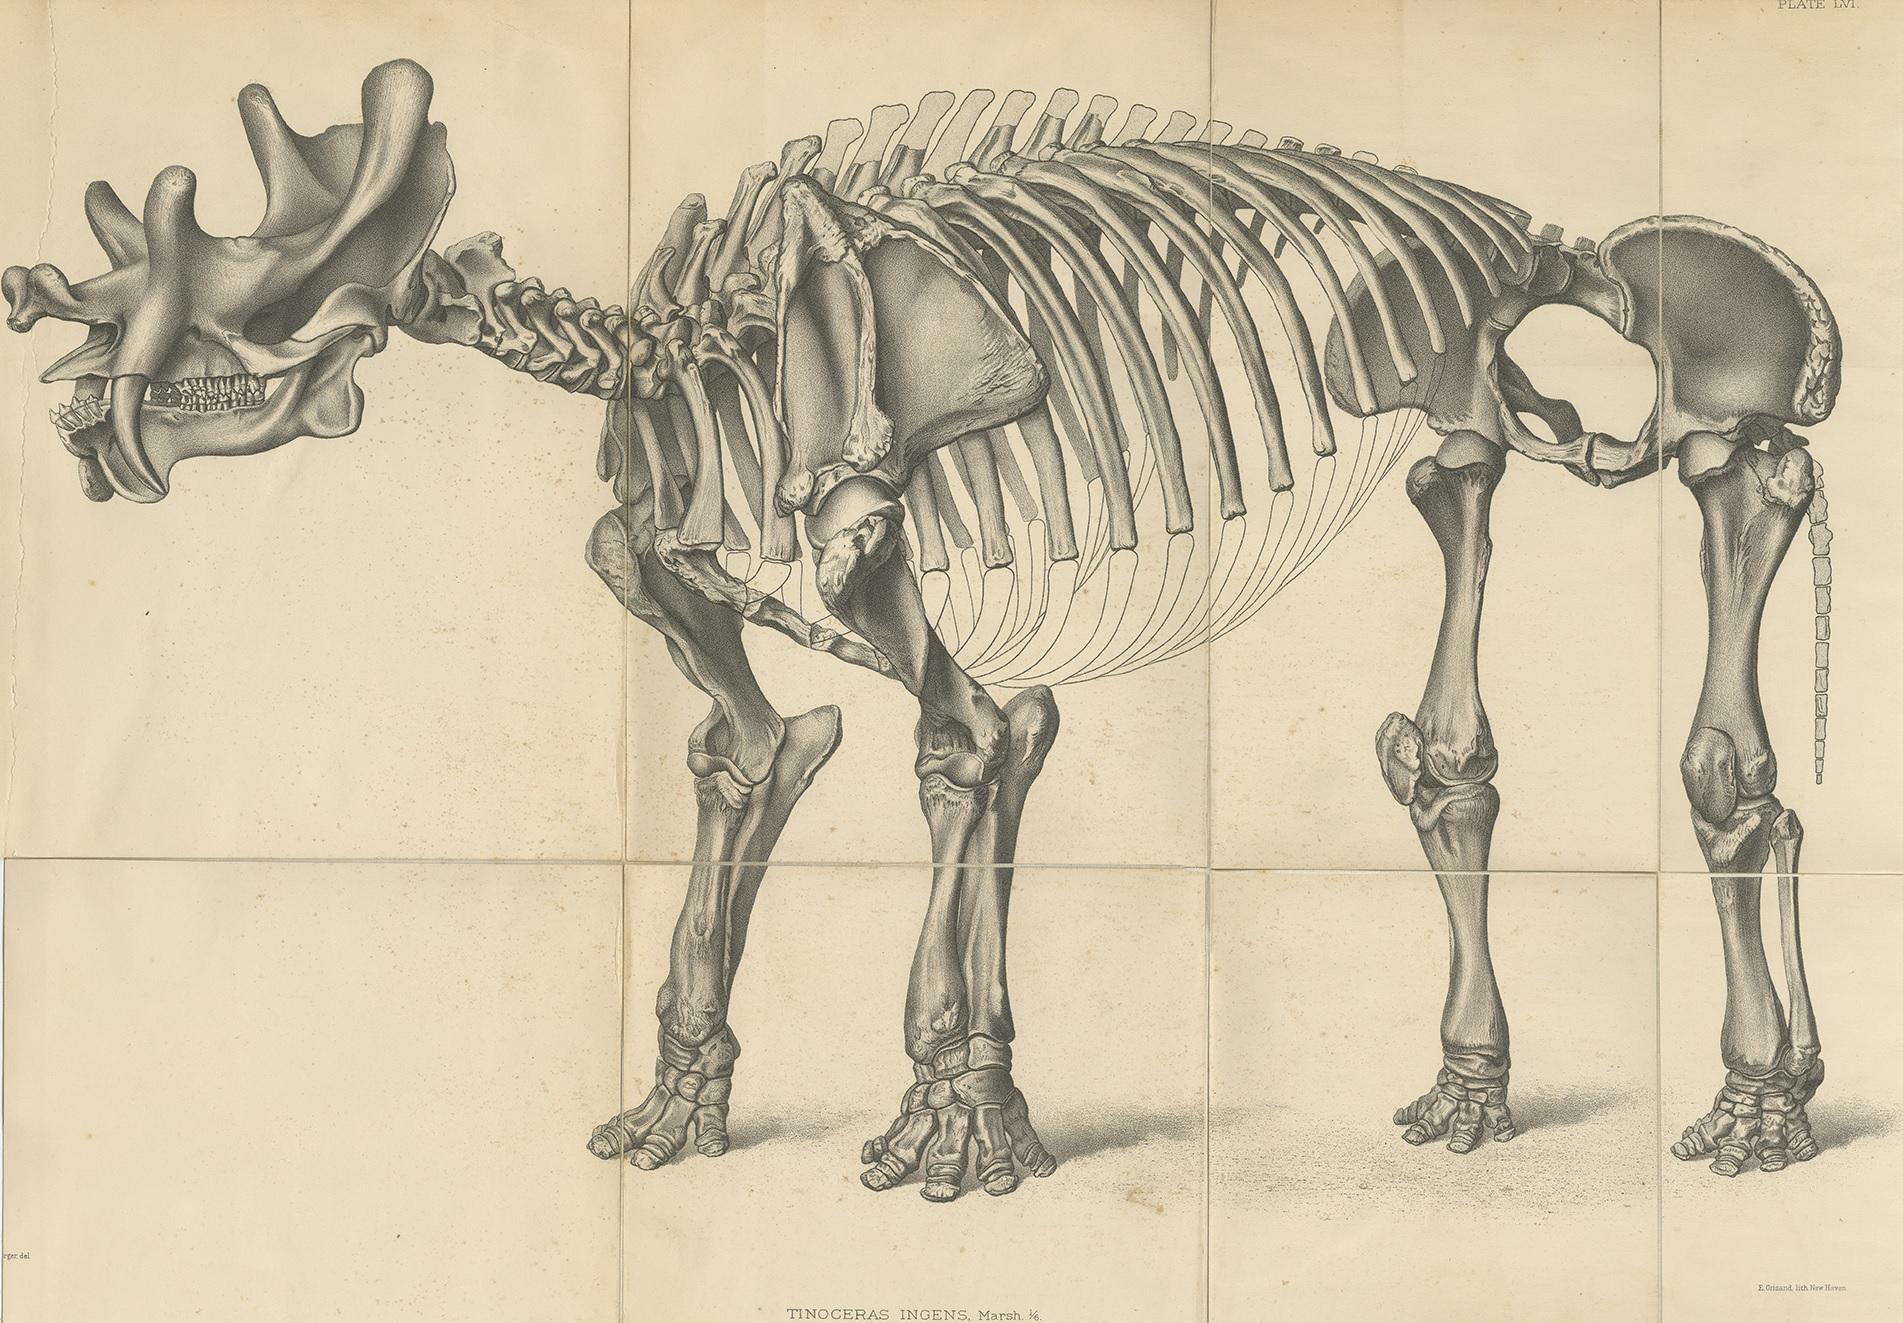 Antique print titled 'Tinoceras Ingens'. Original lithograph of a Tinoceras Ingens, a large extinct mammal. This print originates from volume 10 of 'Monographs of the United States Geological Survey' by Othniel Charles Marsh. Published 1886.